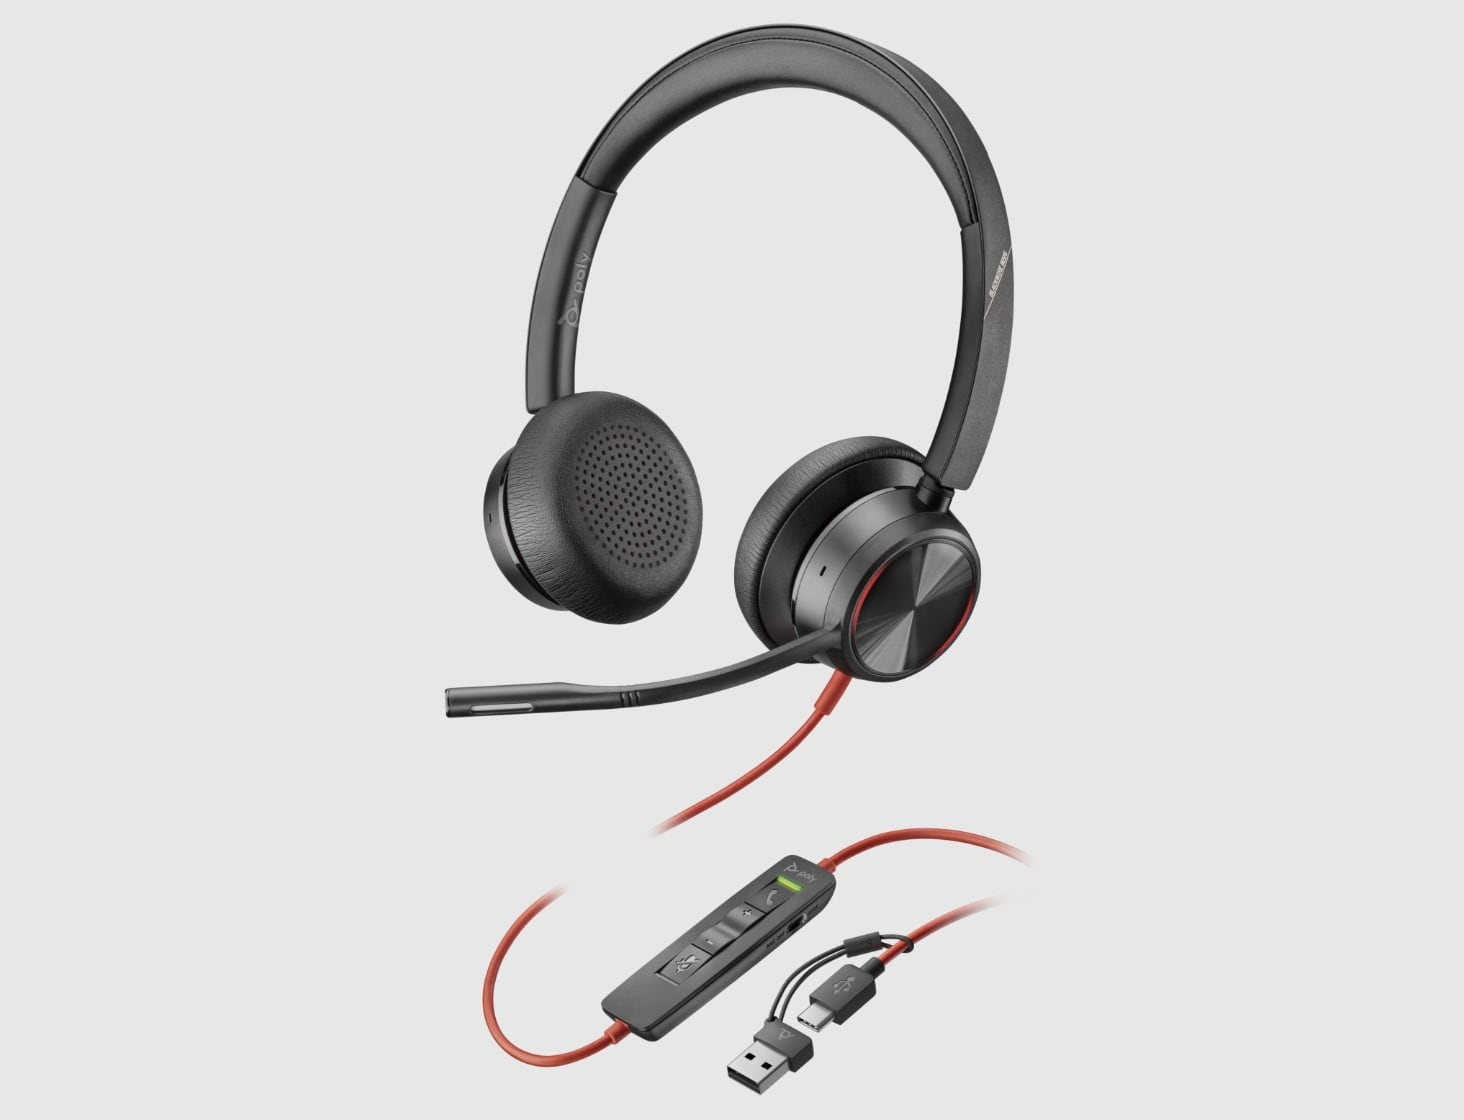 Shop Headsets: Wired, Wireless, Bluetooth & More